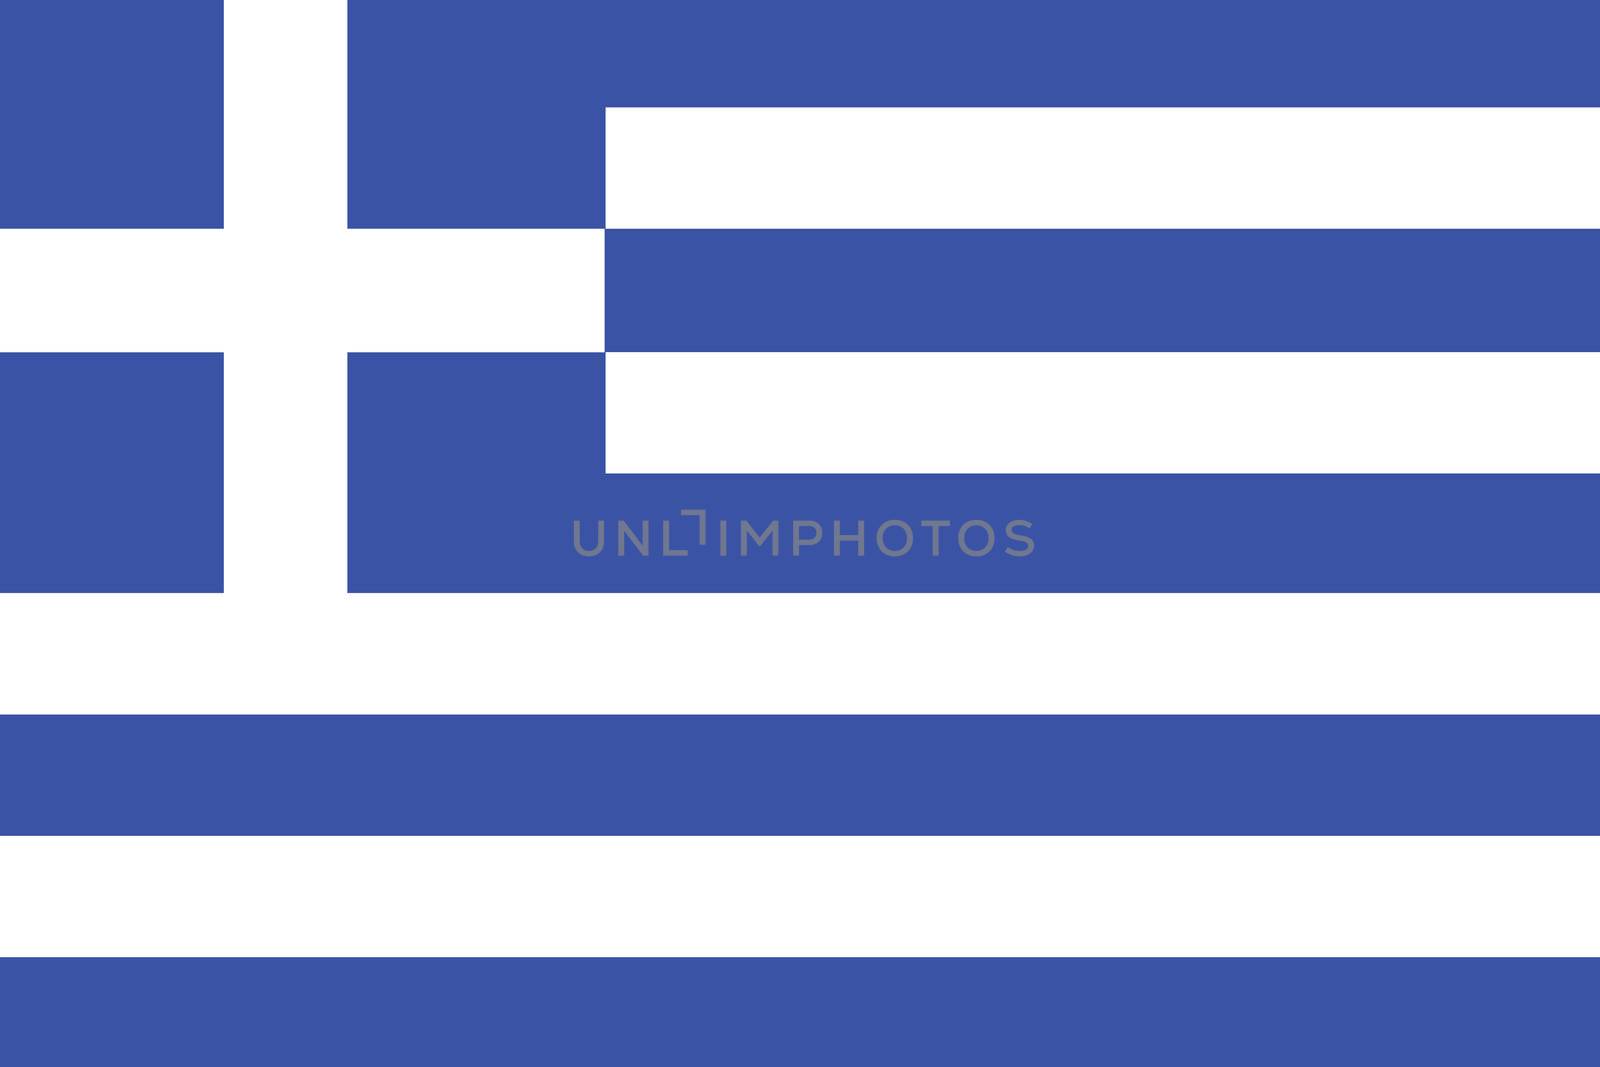 An Illustrated Drawing of the flag of Greece